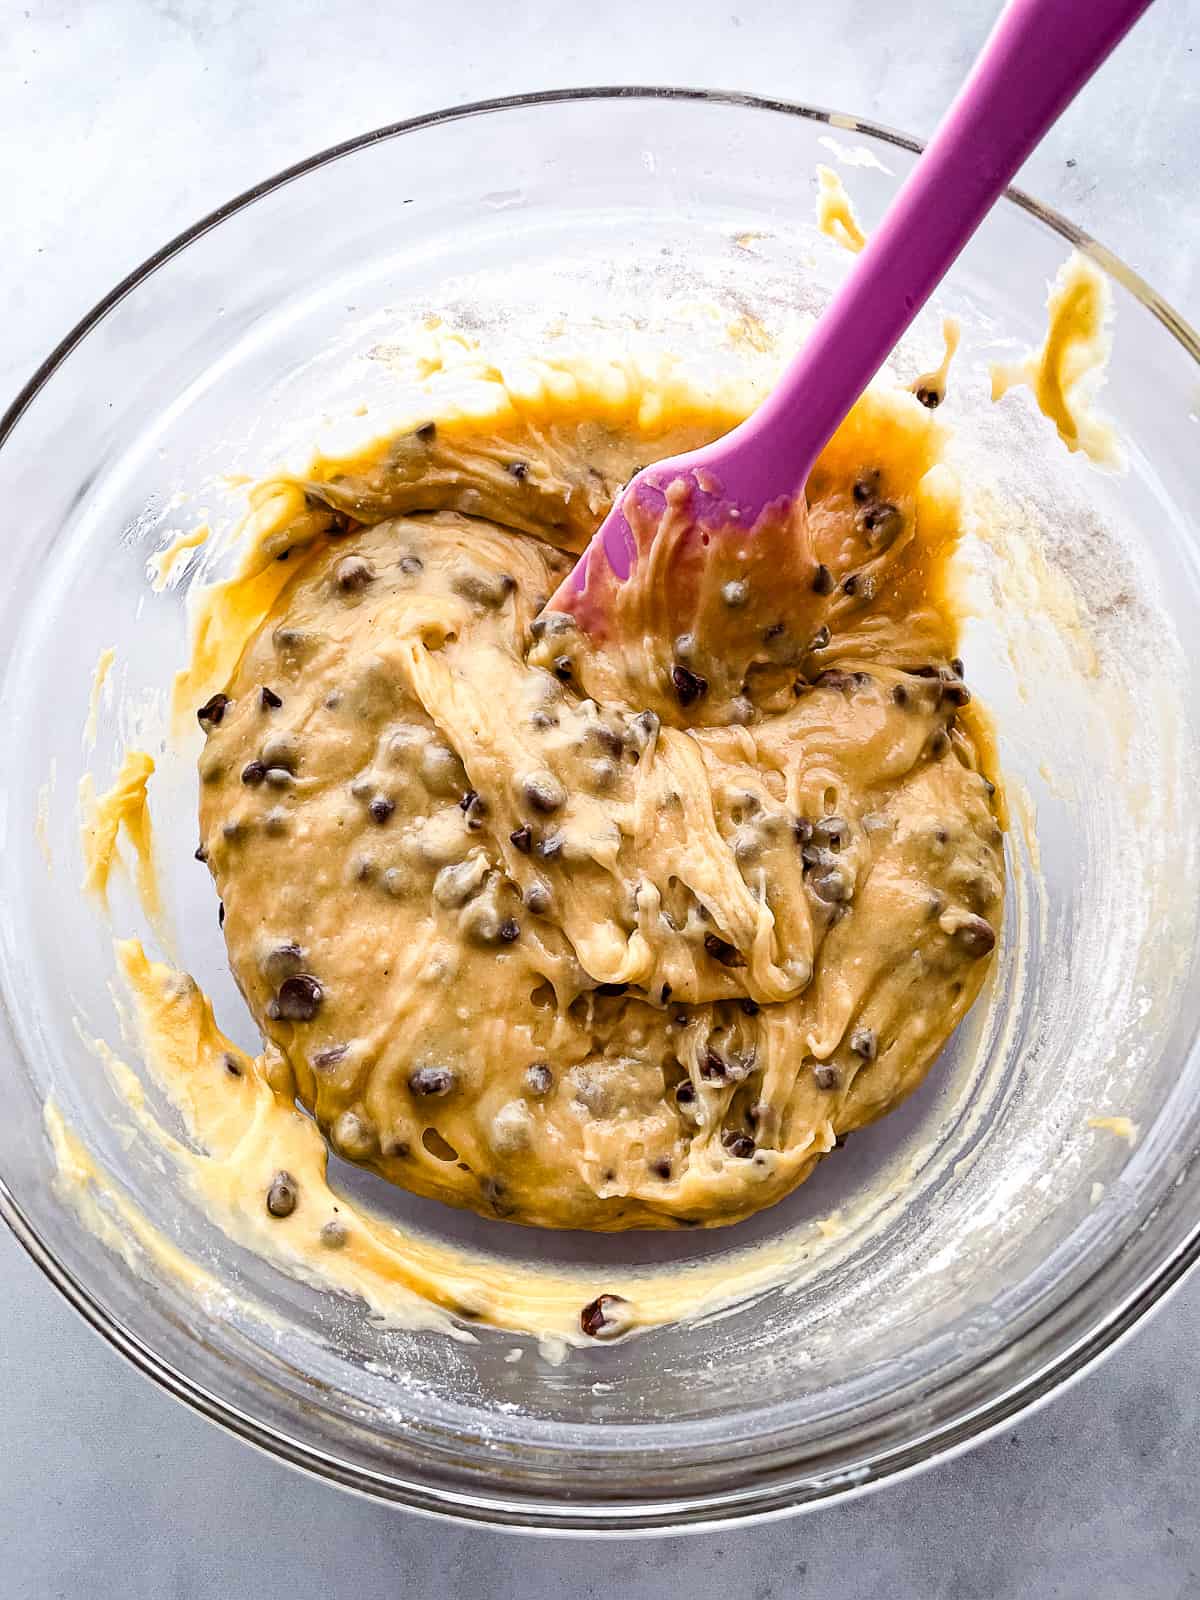 Gluten-free chocolate chip muffin batter in a glass bowl.